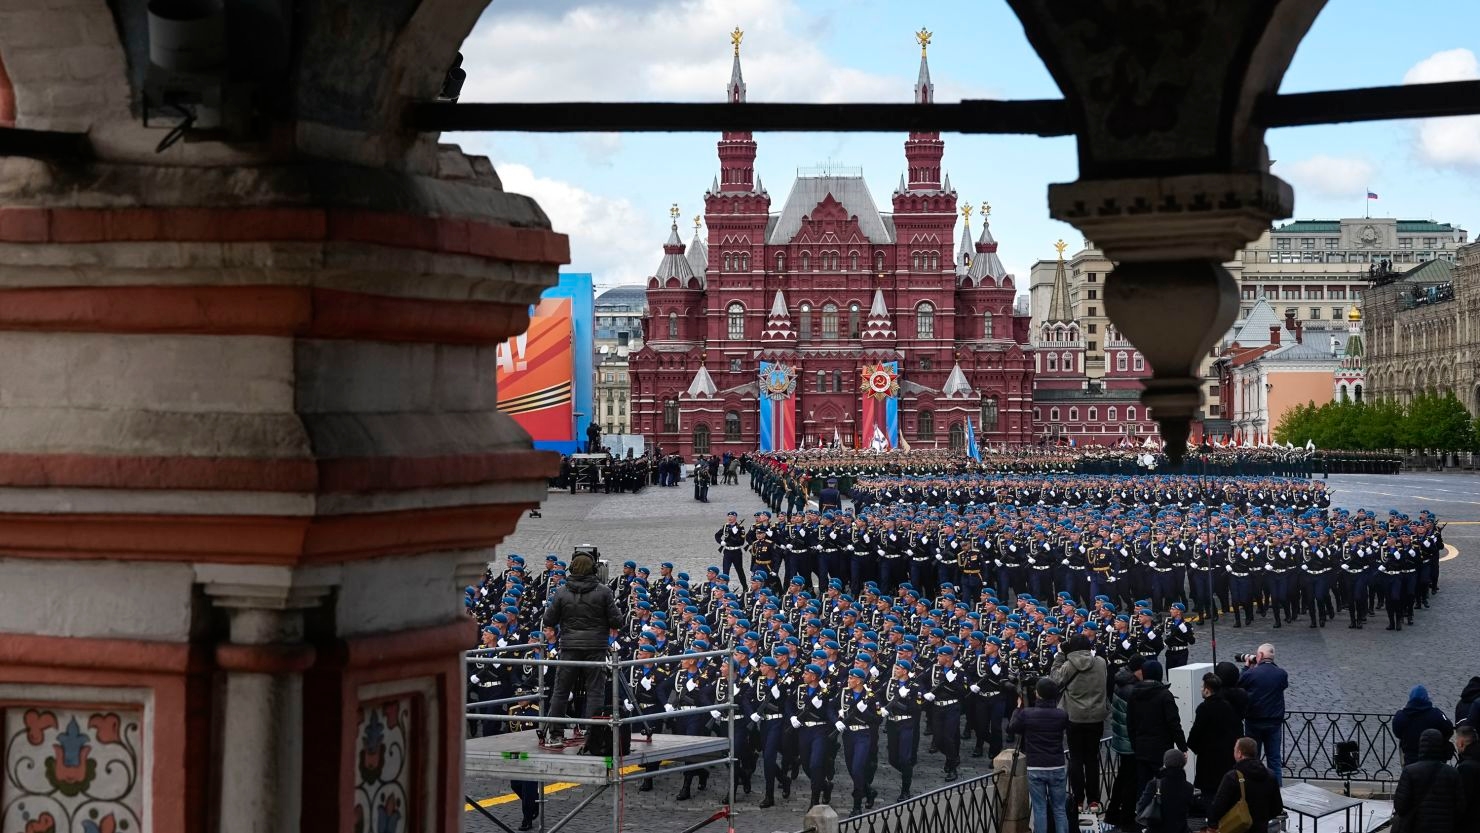 Russian soldiers march during the Victory Day military parade dress rehearsal at Red Square in Moscow, on May 5. The parade will take place on May 9, marking the 79th anniversary of victory in the Second World War.